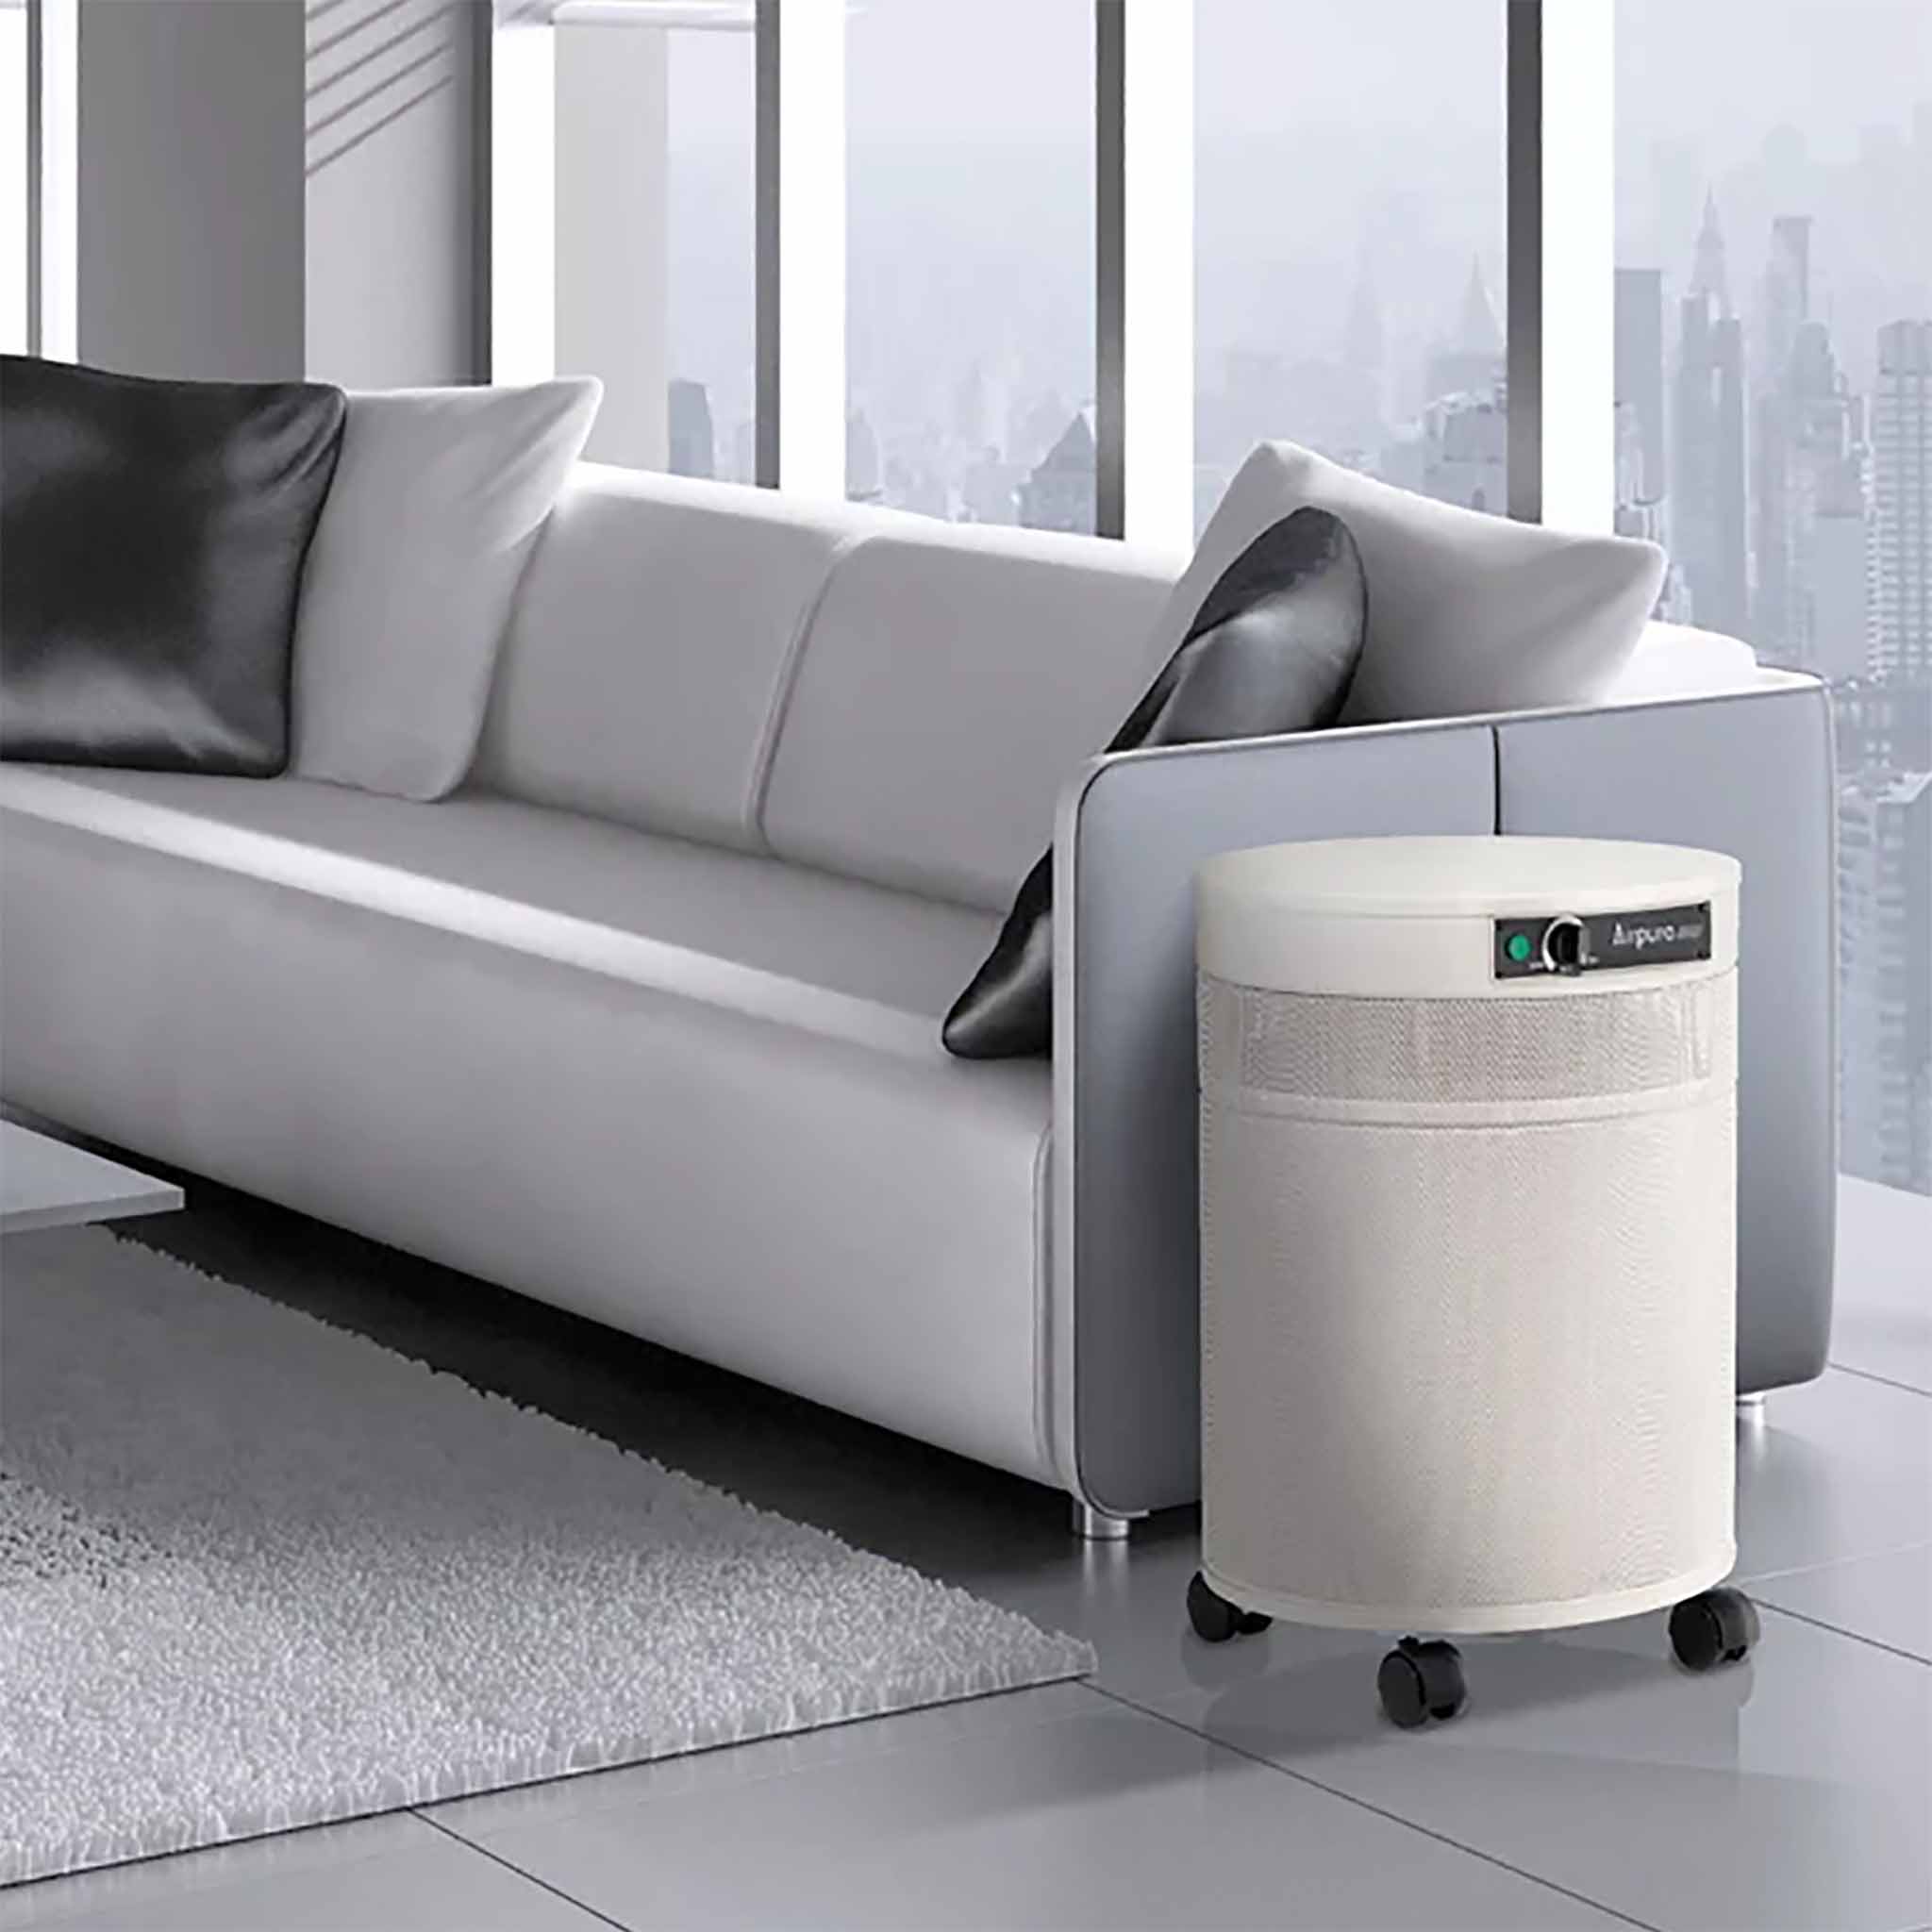 Airpura Air Purifiers - Revolutionary technology is proven to eliminate a wide range of chemicals, pollutants, and odors leaving only clean and fresh air.